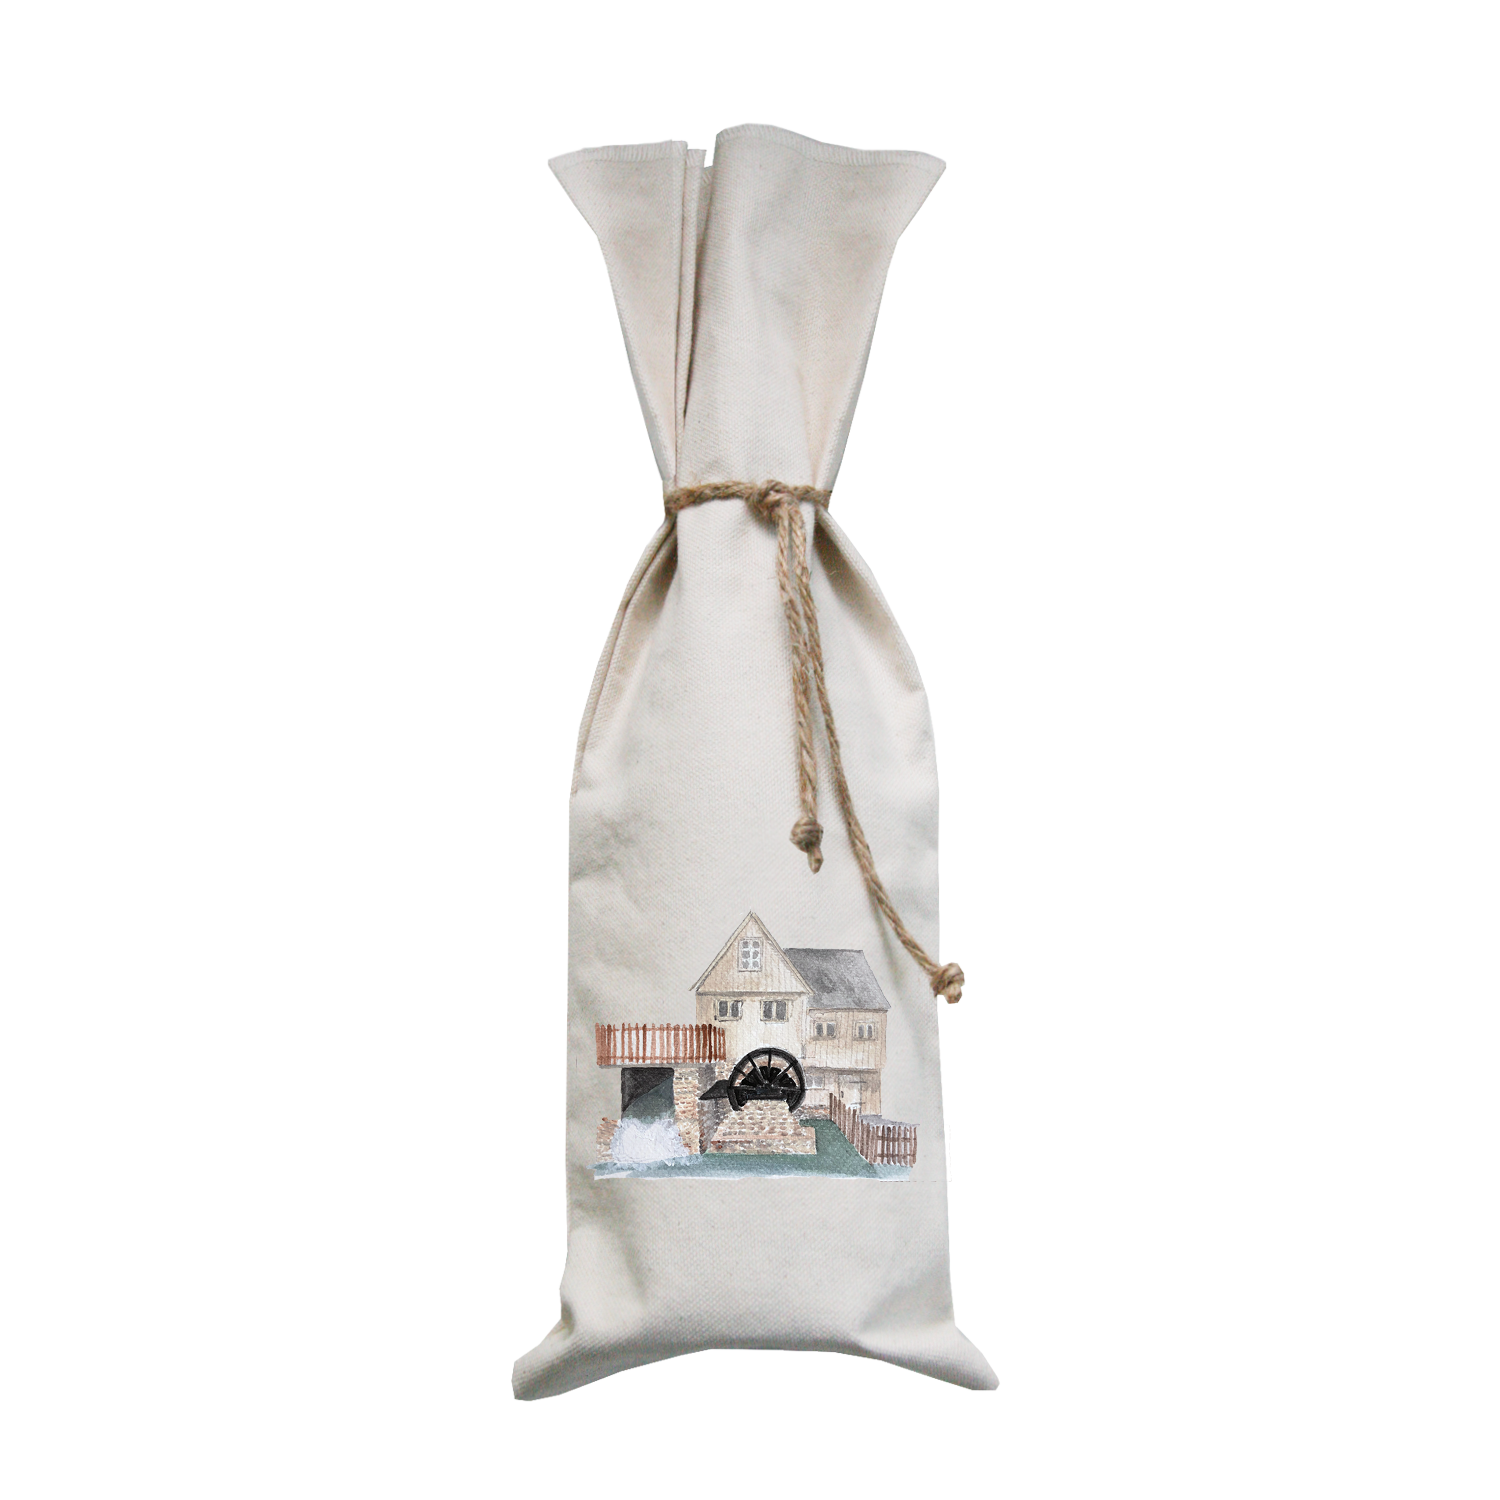 plimoth patuxet gristmill wine bag